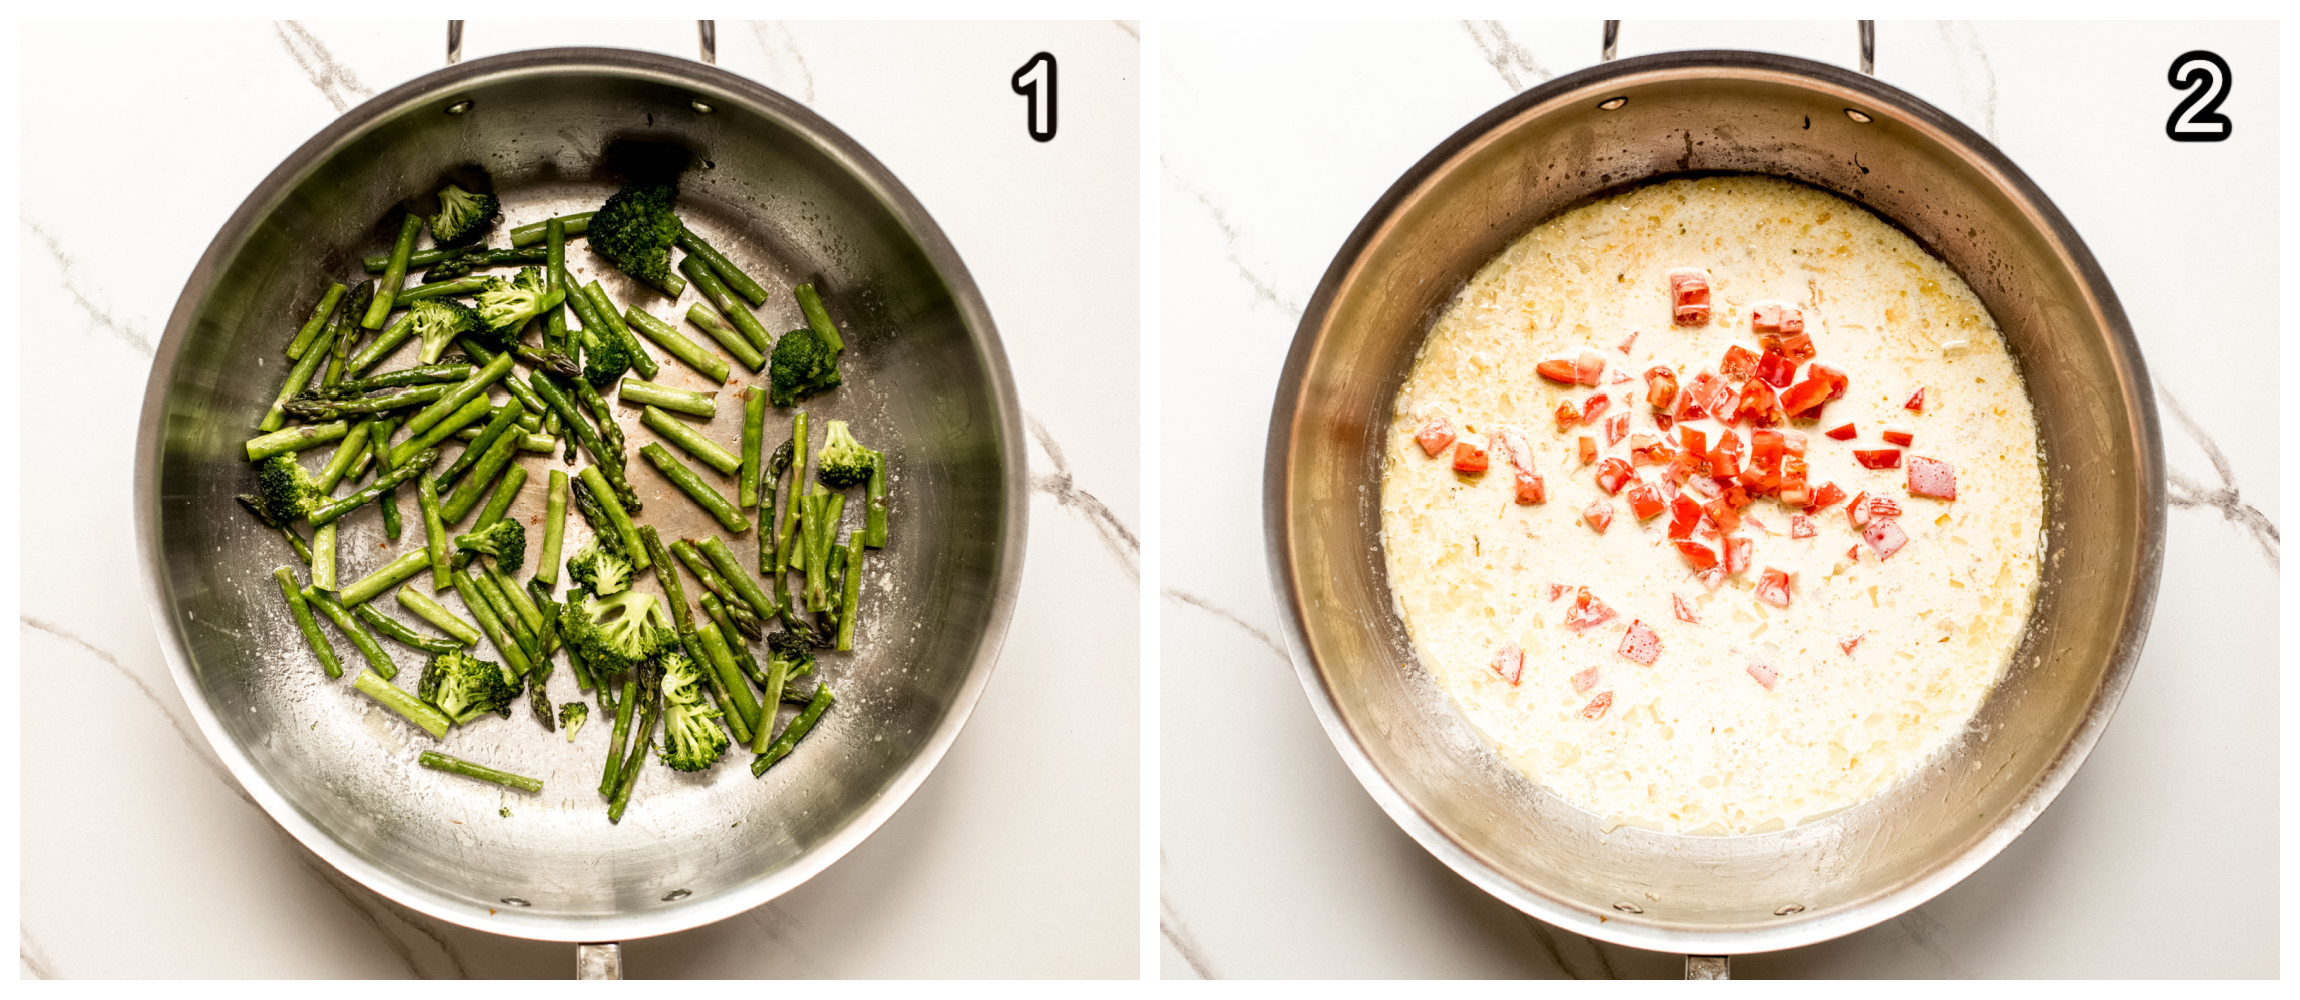 two skillet photos showing cooked vegetables in one, and cream and tomatoes in second.